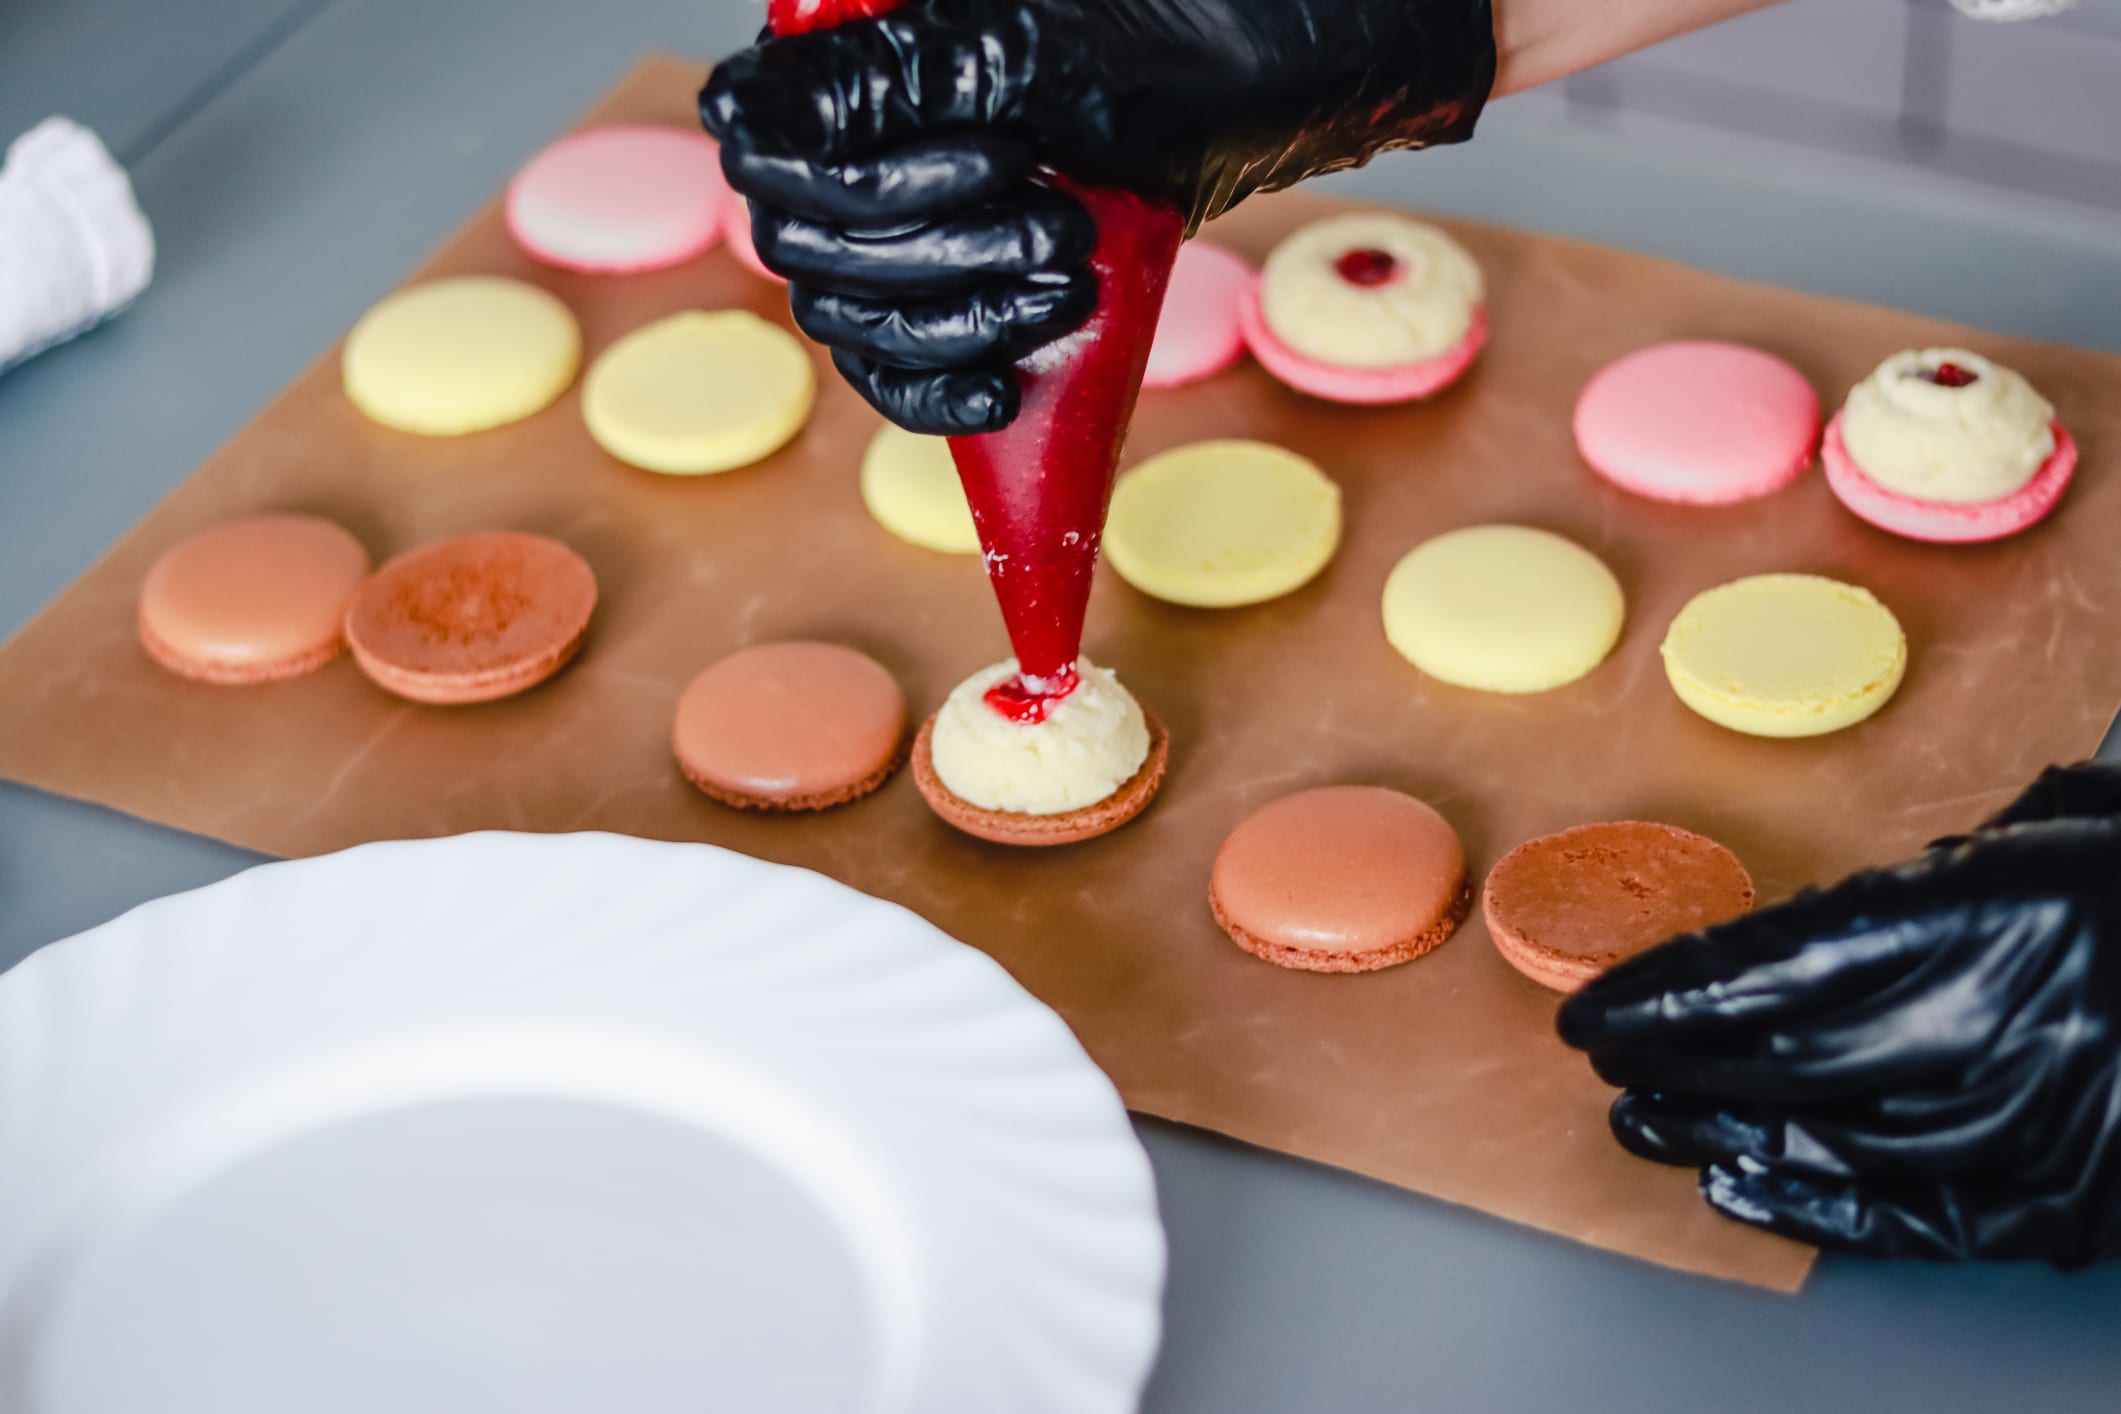 Confectioner in black rubber gloves stuffs macaroon cakes with jam